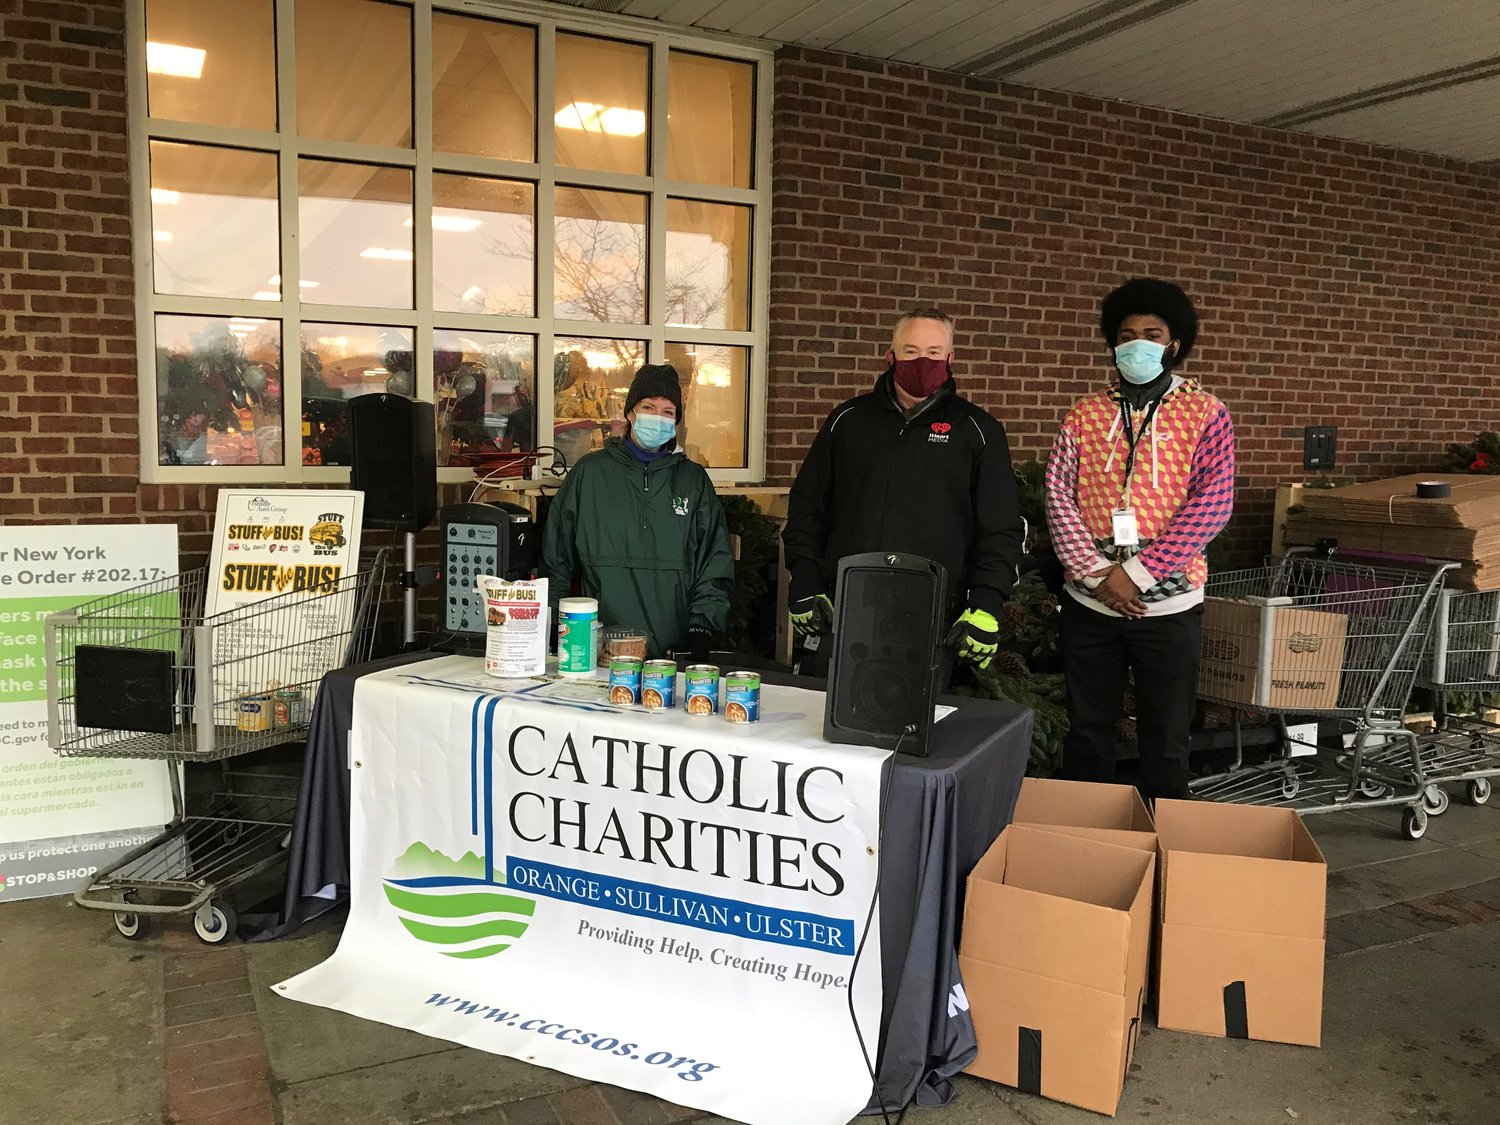 Catholic Charities’ team members Kathy Beckvermit, left, and Glenn Granum, right are joined by iHeartMedia Senior Vice President of Sales Rob VanDerbeck, center, at the 23rd annual Friendly Auto Group Stuff-the-Bus food drive.